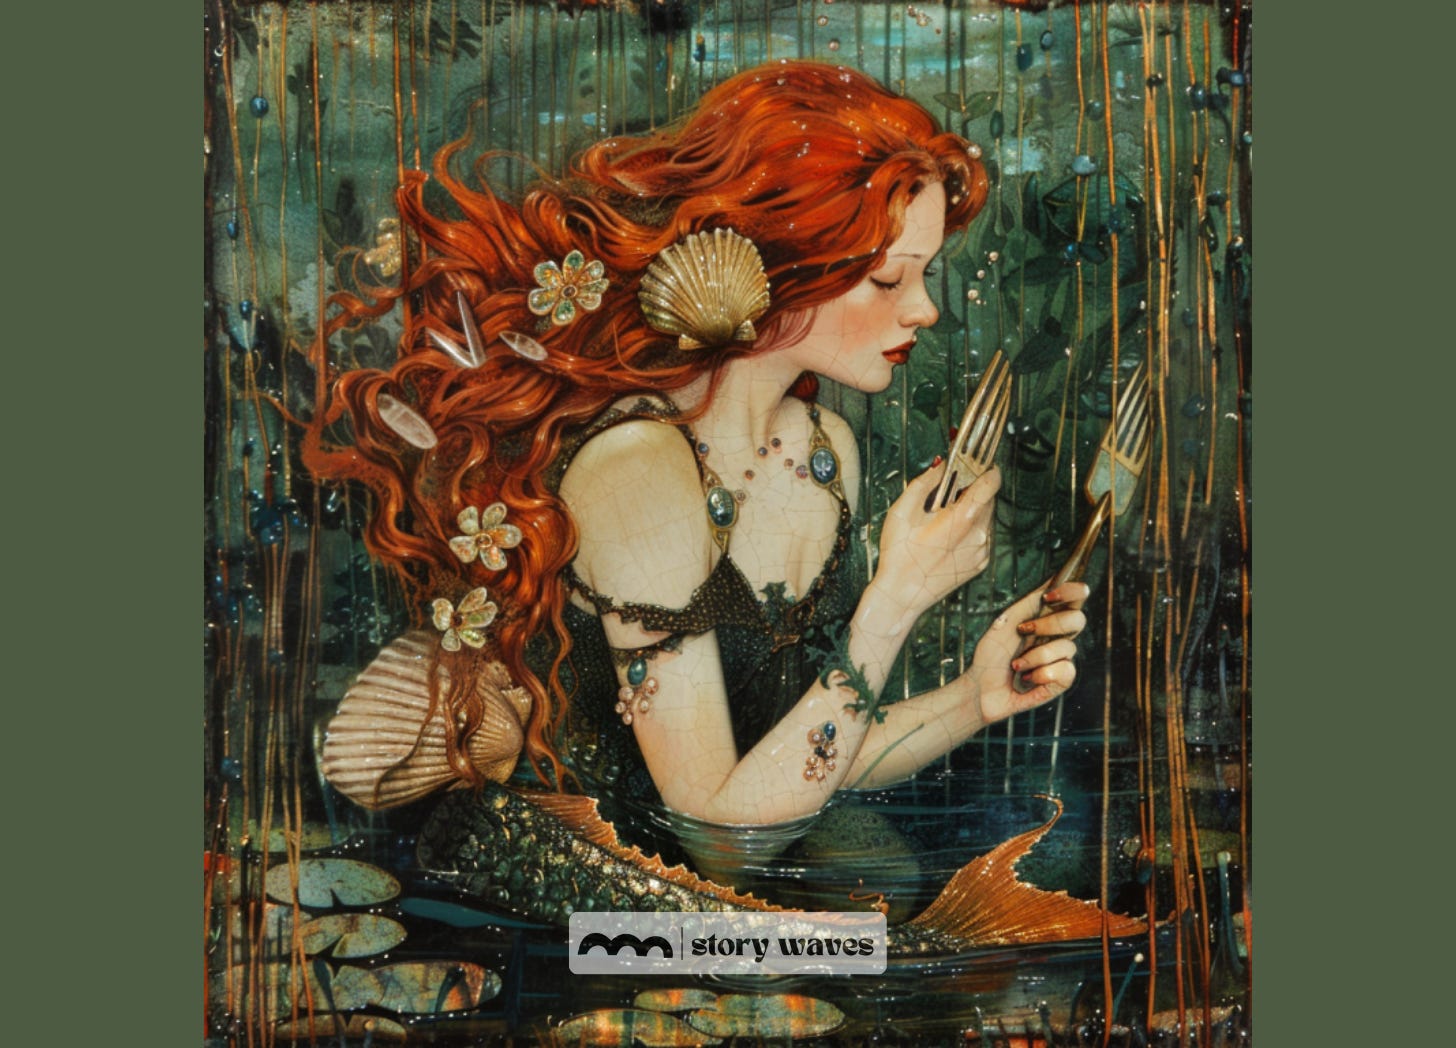 a painting of a mermaid with red hair holding combs